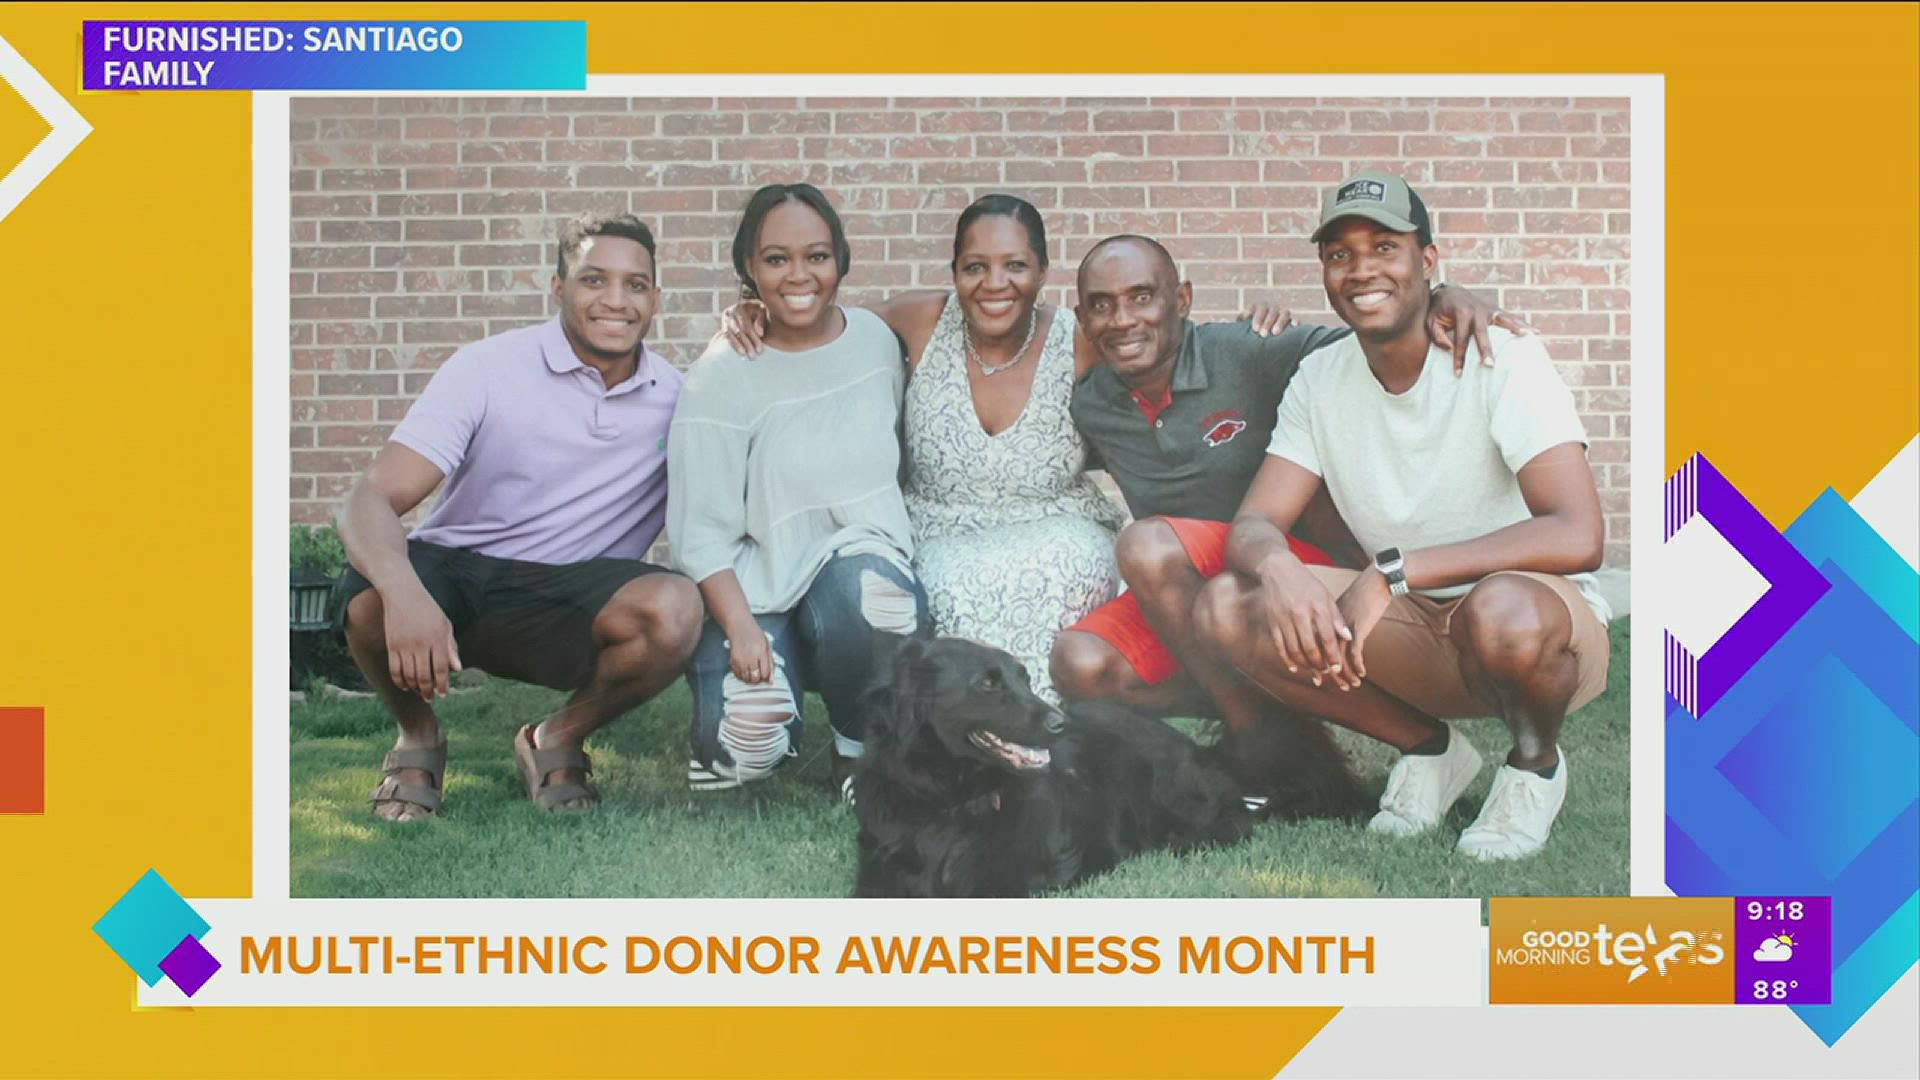 The director of diversity, equity and inclusion at STA shares the importance of BIPOC organ donors - and the parents of a courageous donor share their son’s legacy.